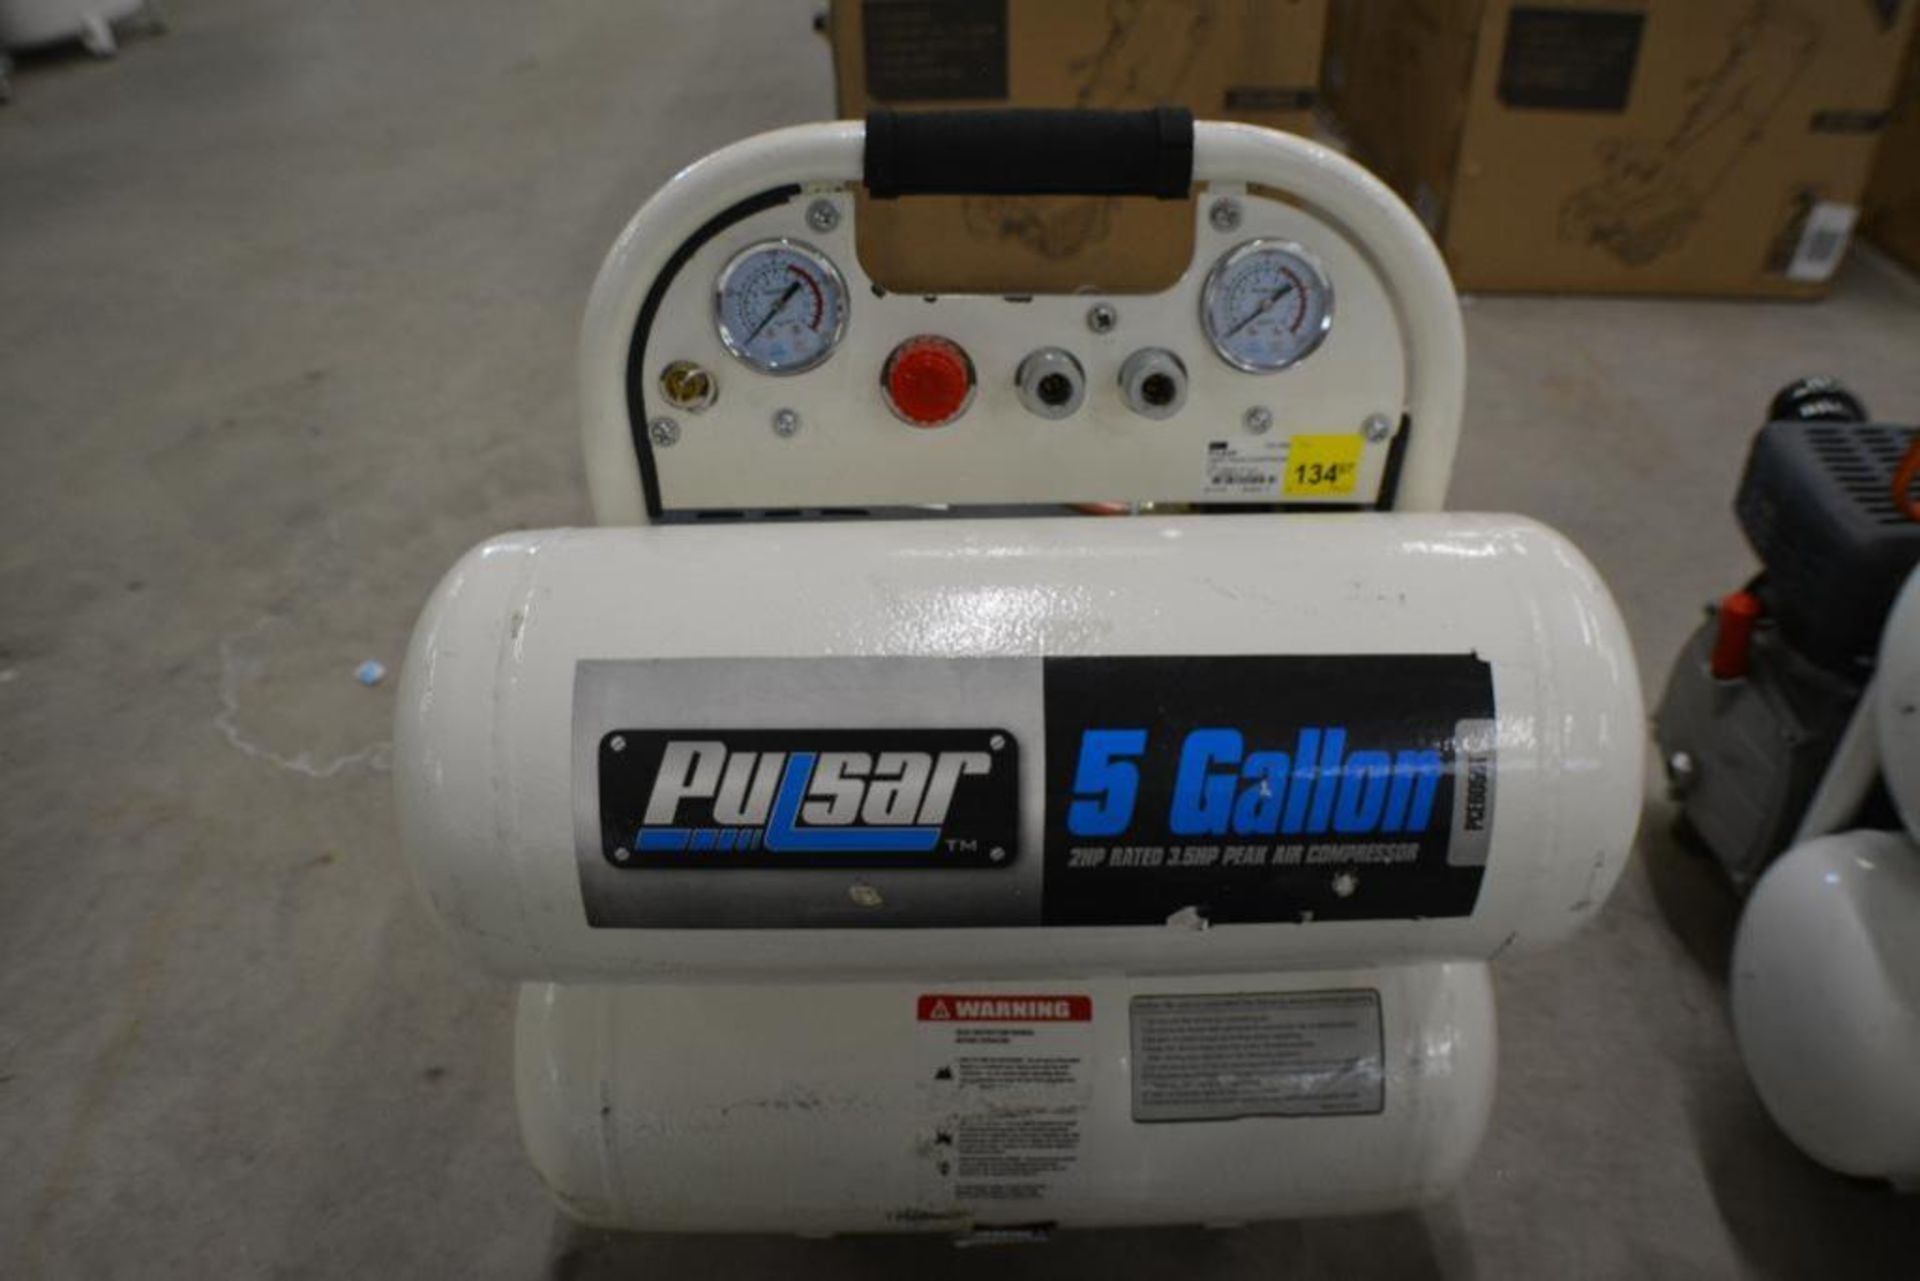 5 Gallon Air Compressor 2.0HP 115PSI by Pulsar. Qty 2 x $ - Image 3 of 5